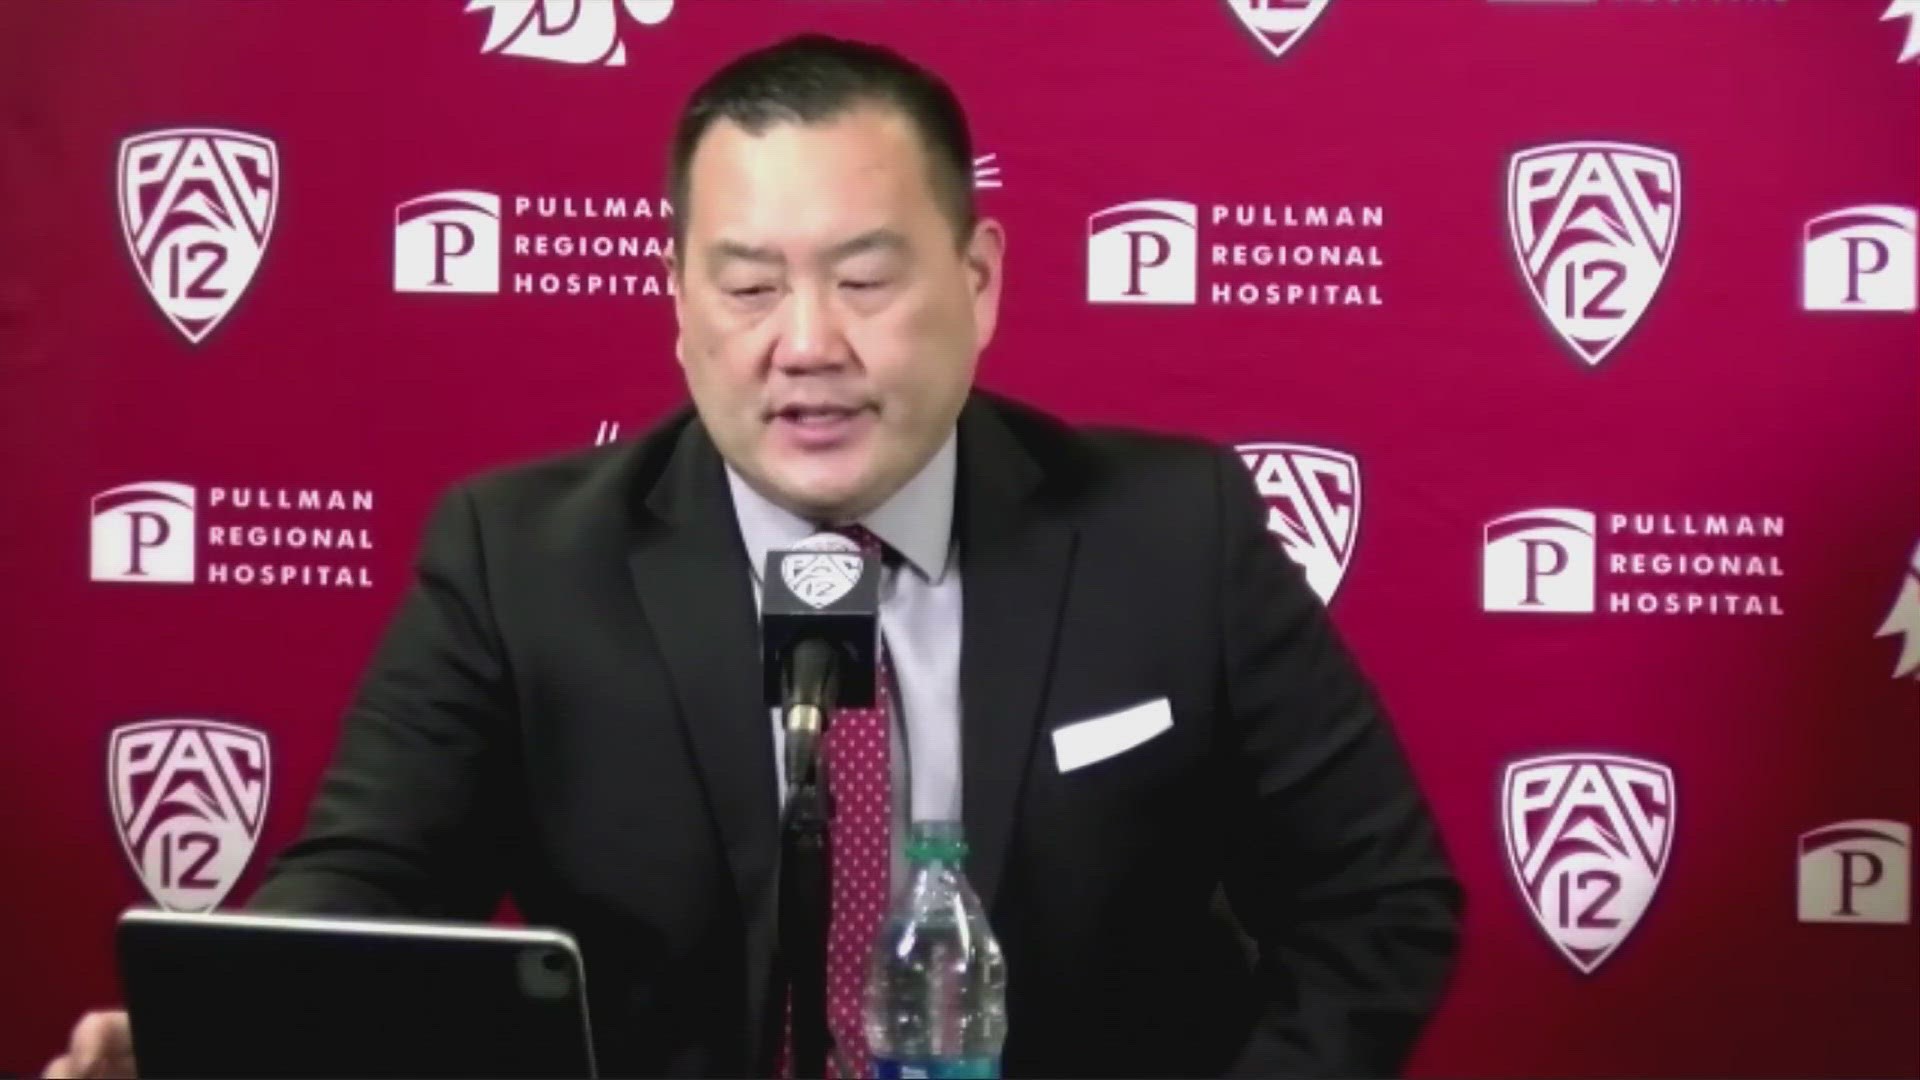 Chun has been the athletic director at Washington State since January 2018, and now moves to the Cougars' in-state rival.